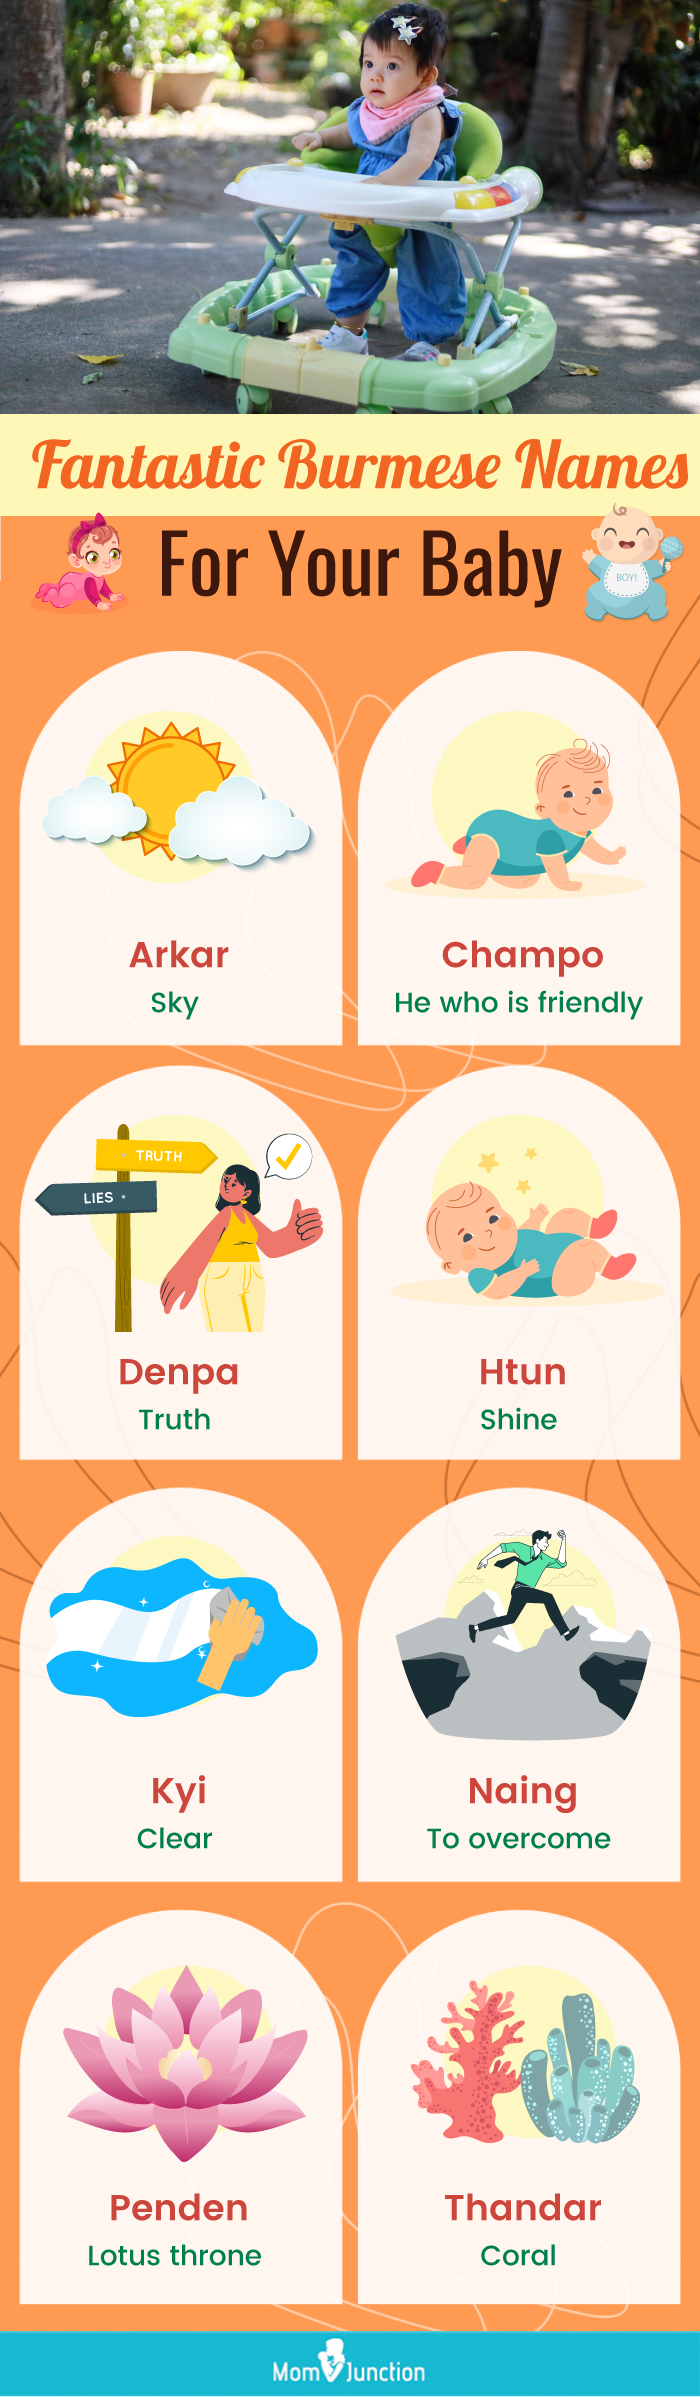 fantastic burmese names for your baby (infographic)